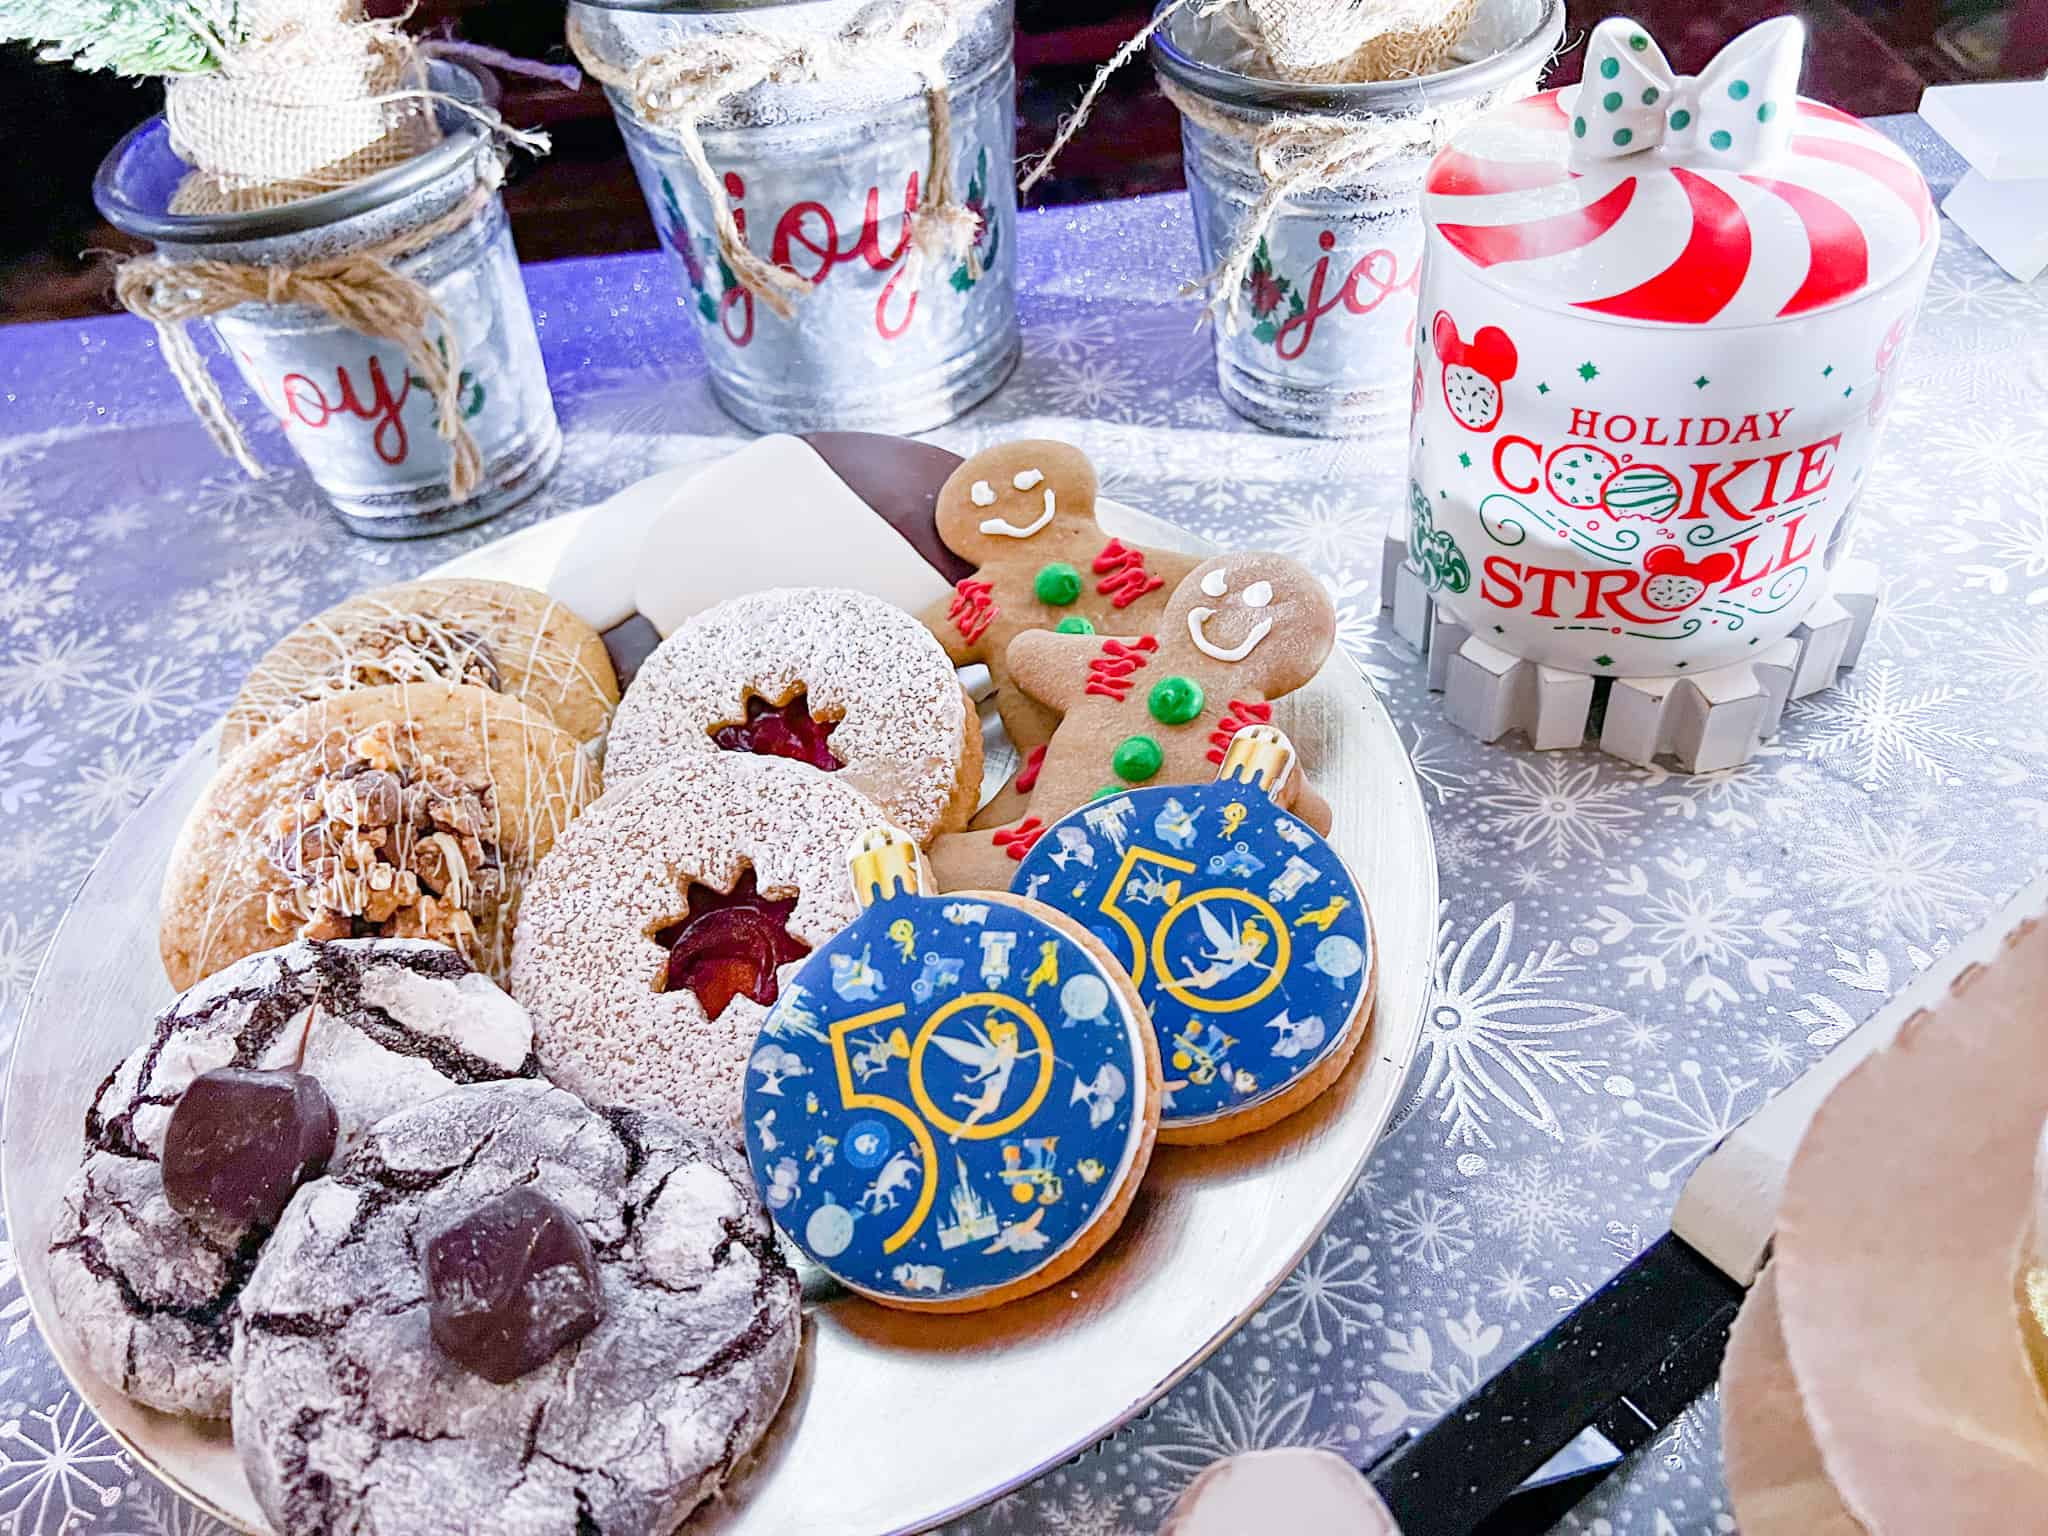 A variety of cookies from the EPCOT Holiday Cookie Stroll are on a white platter and a peppermint style cookie jar is next to the platter